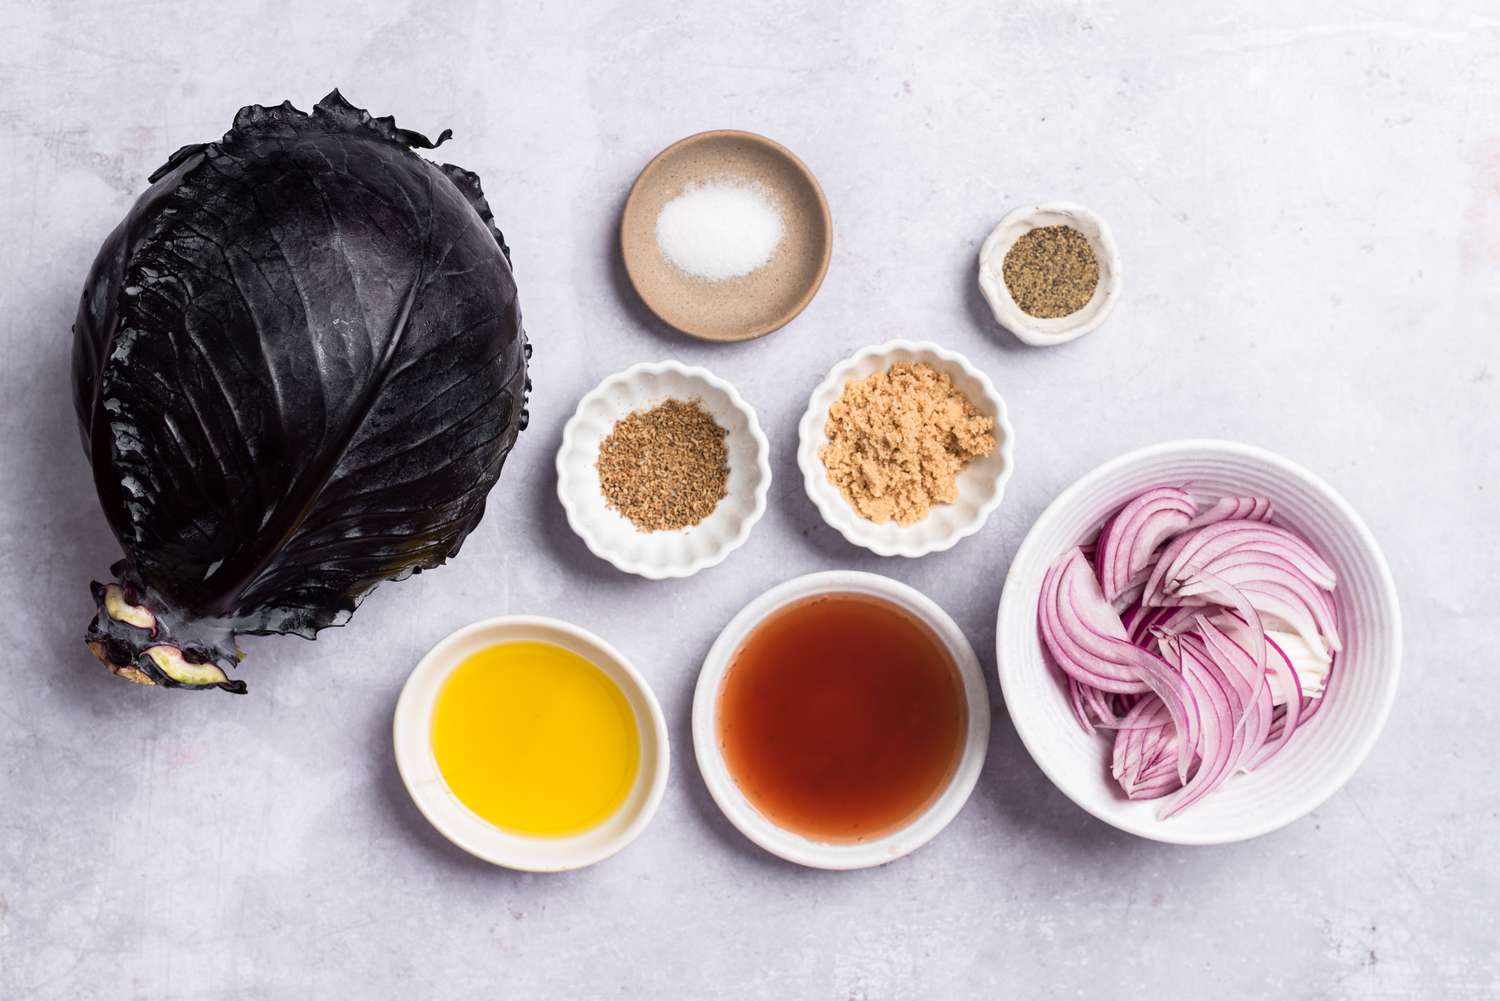 Ingredients to make Instant Pot braised red cabbage